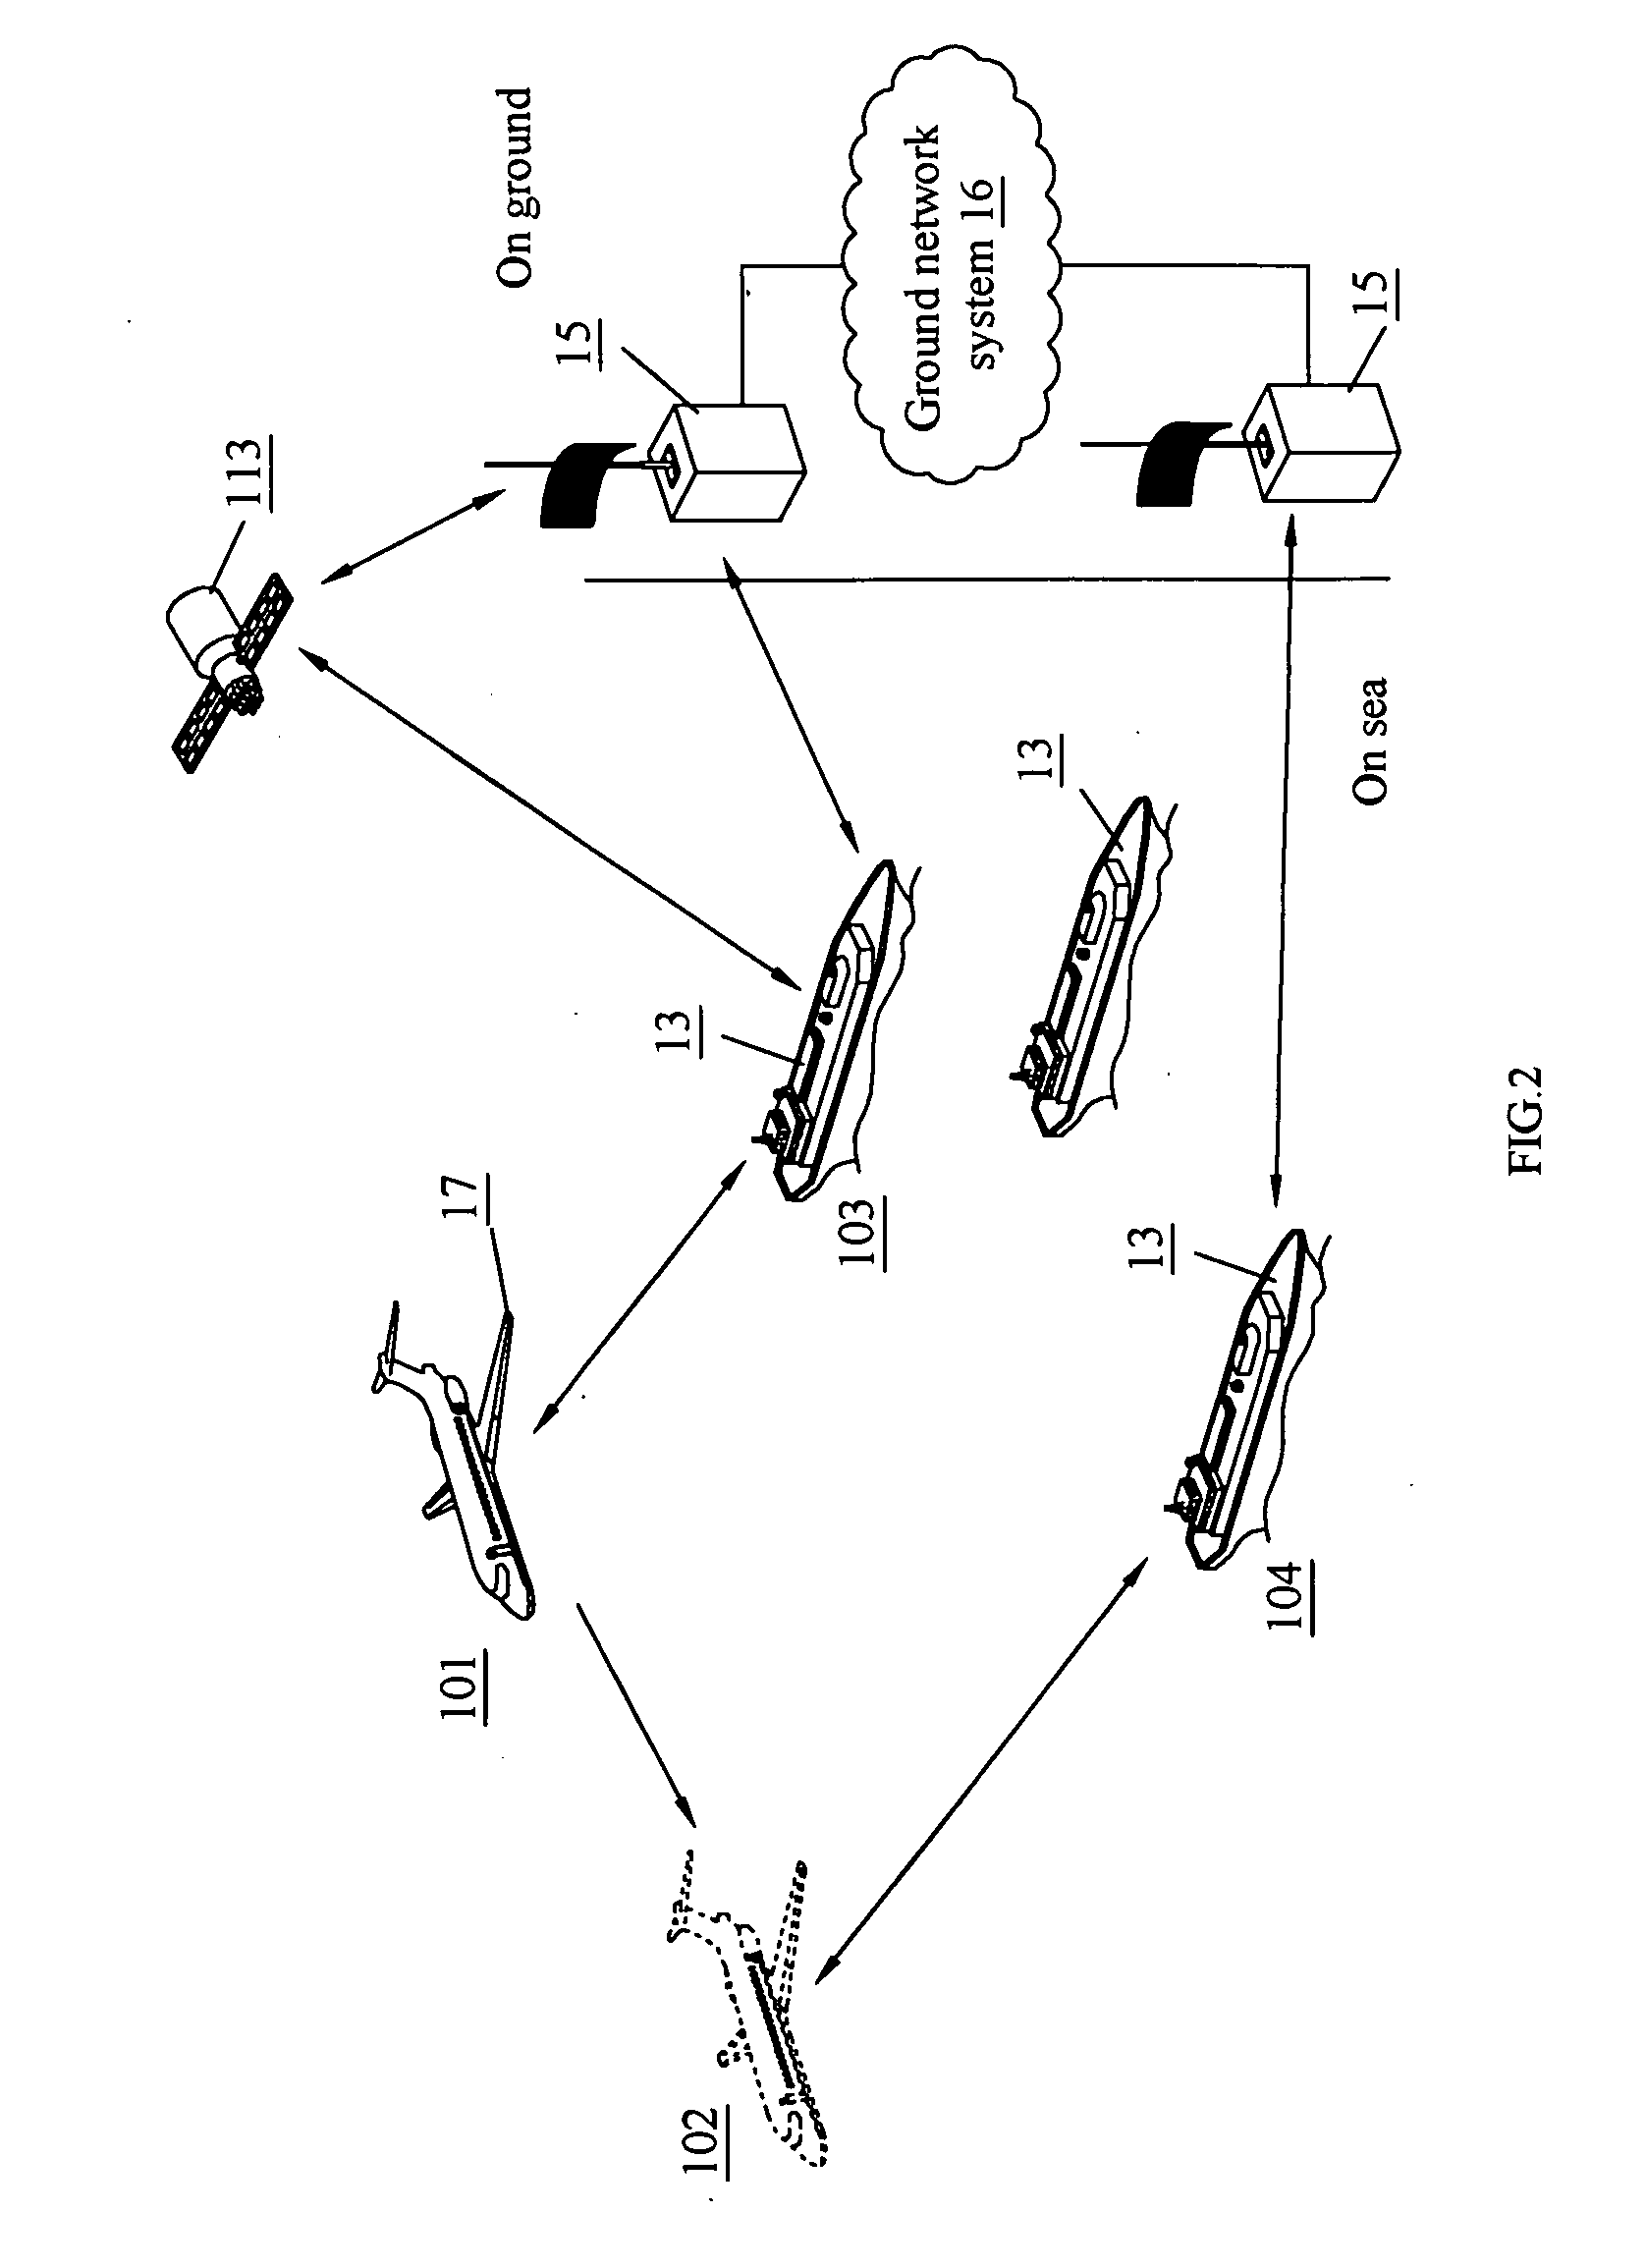 System for wireless communication between marine vessels and aircraft, and wireless communication system on marine vessels therefor